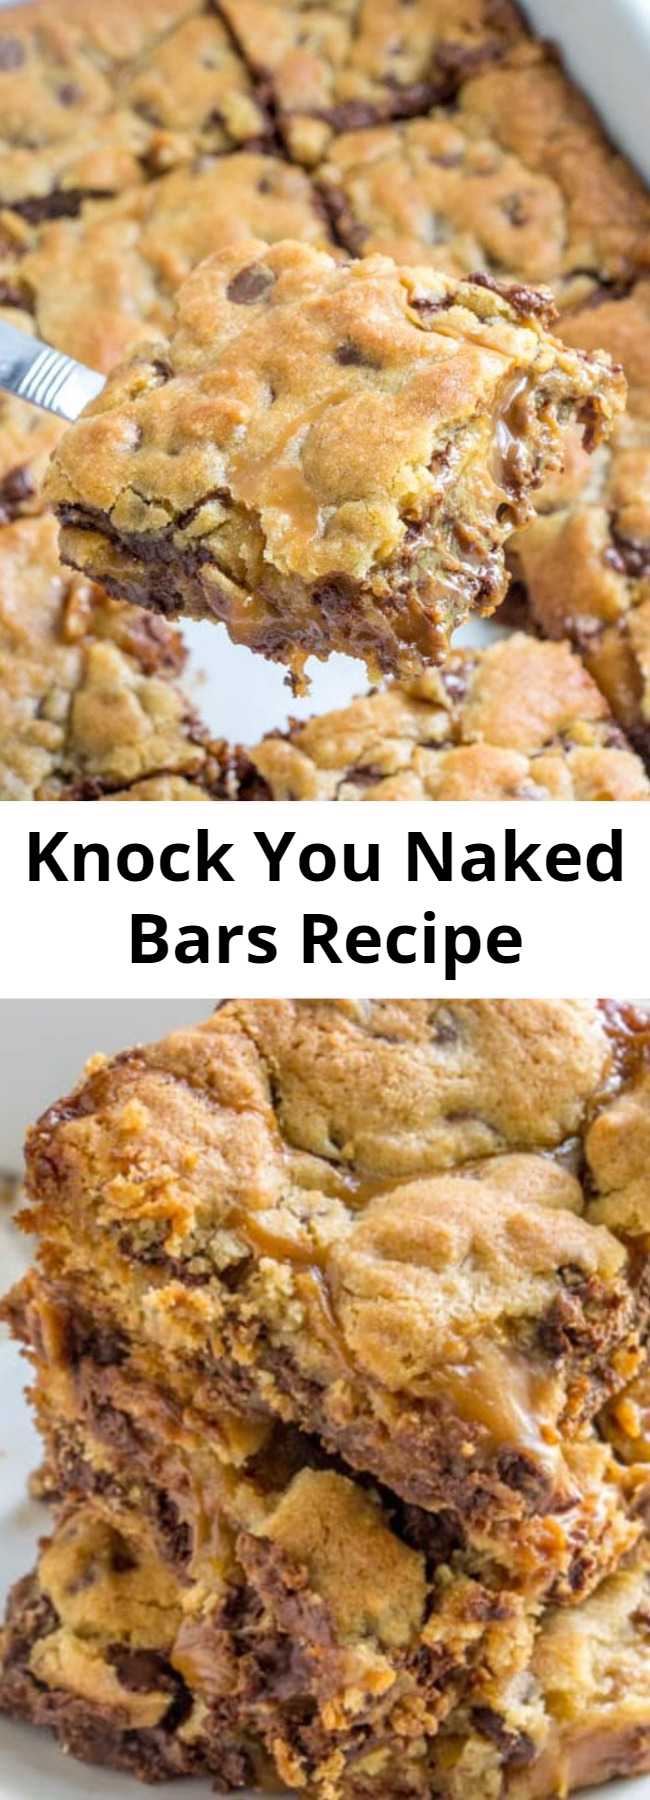 Knock You Naked Bars Recipe - Delicious Caramel Cookie Bars with an amazing layer of gooey caramel stuffed in better the layers with a hint of peanut butter. These cookie bars are EPIC and you'll never make them anyway again! There's a reason they are called Knock You Naked Bars!